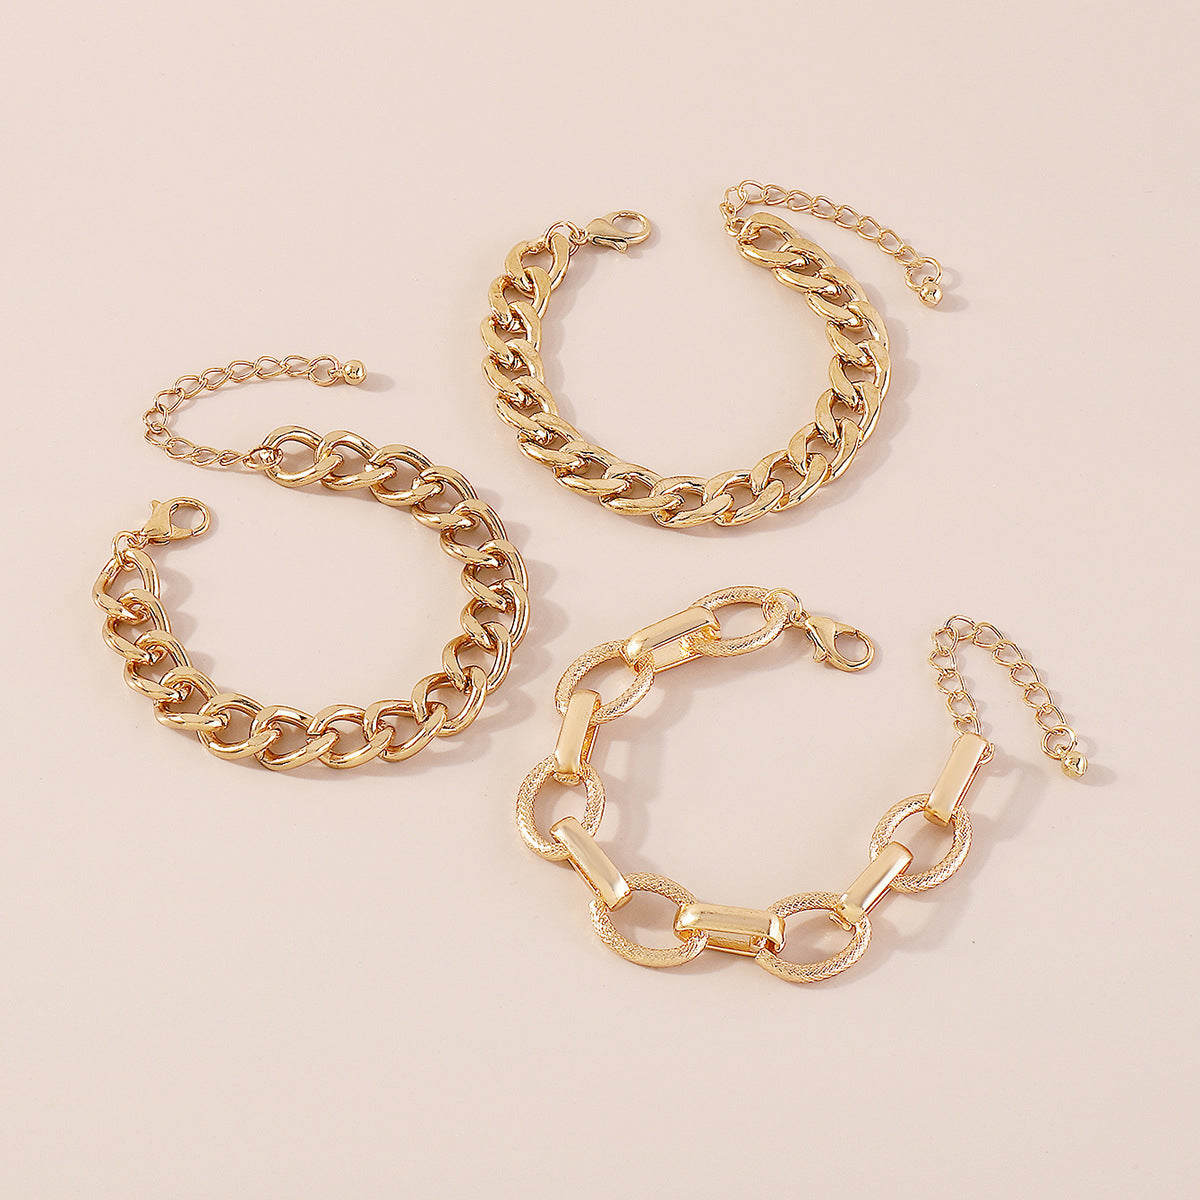 18K Gold-Plated Textured Cable Chain Bracelet Set